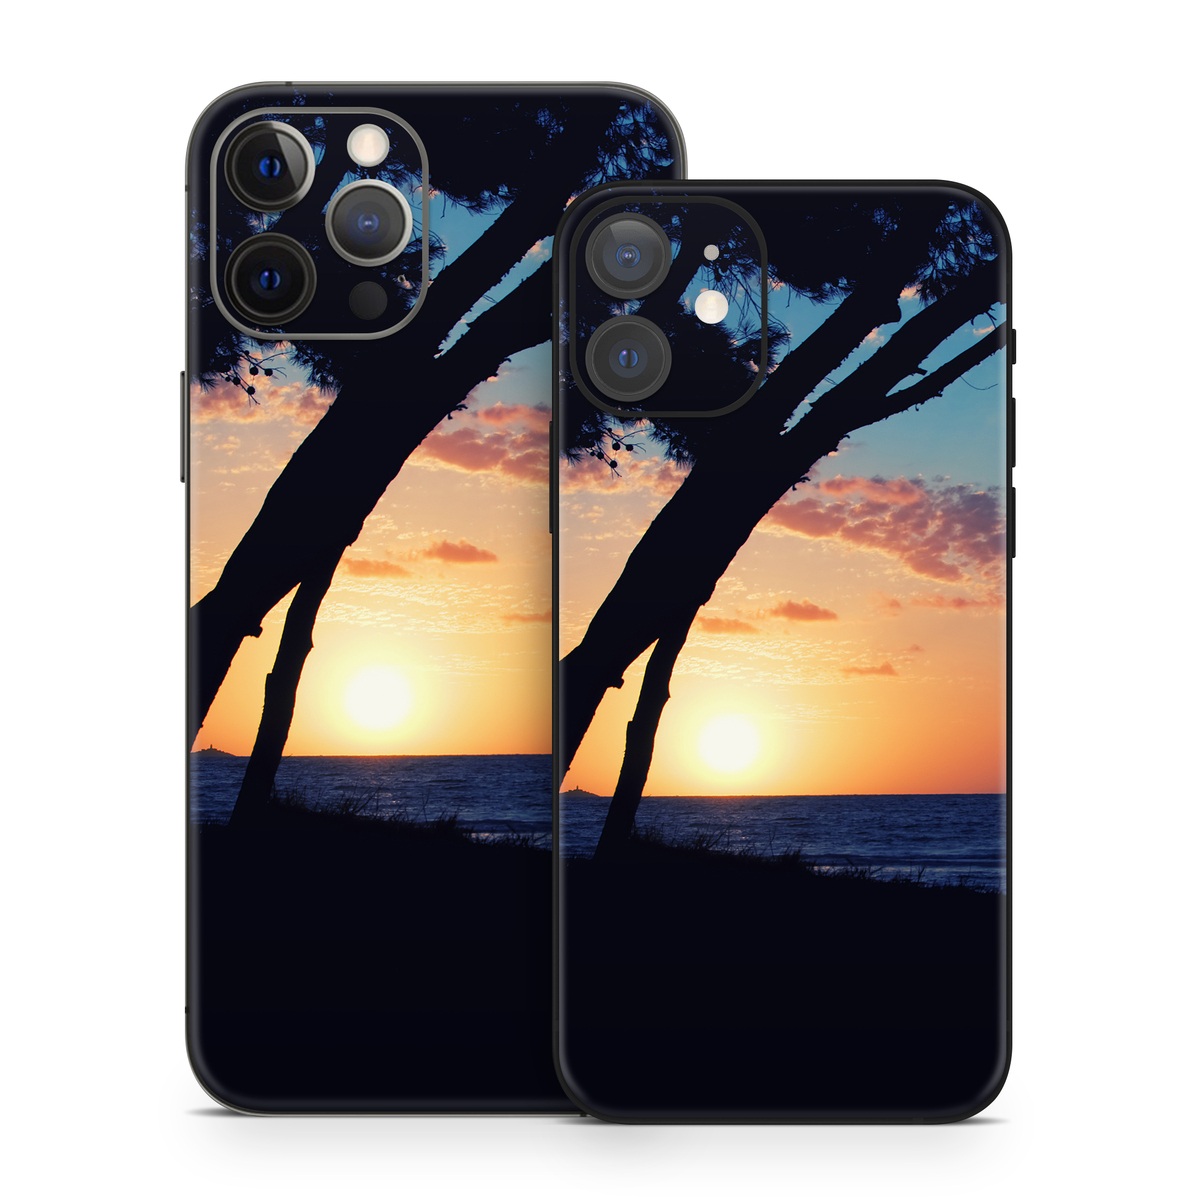 iPhone 12 Skin design of Sky, Horizon, Nature, Tree, Sunset, Sunrise, Ocean, Sea, Natural landscape, Afterglow with black, gray, blue, green, red, pink colors